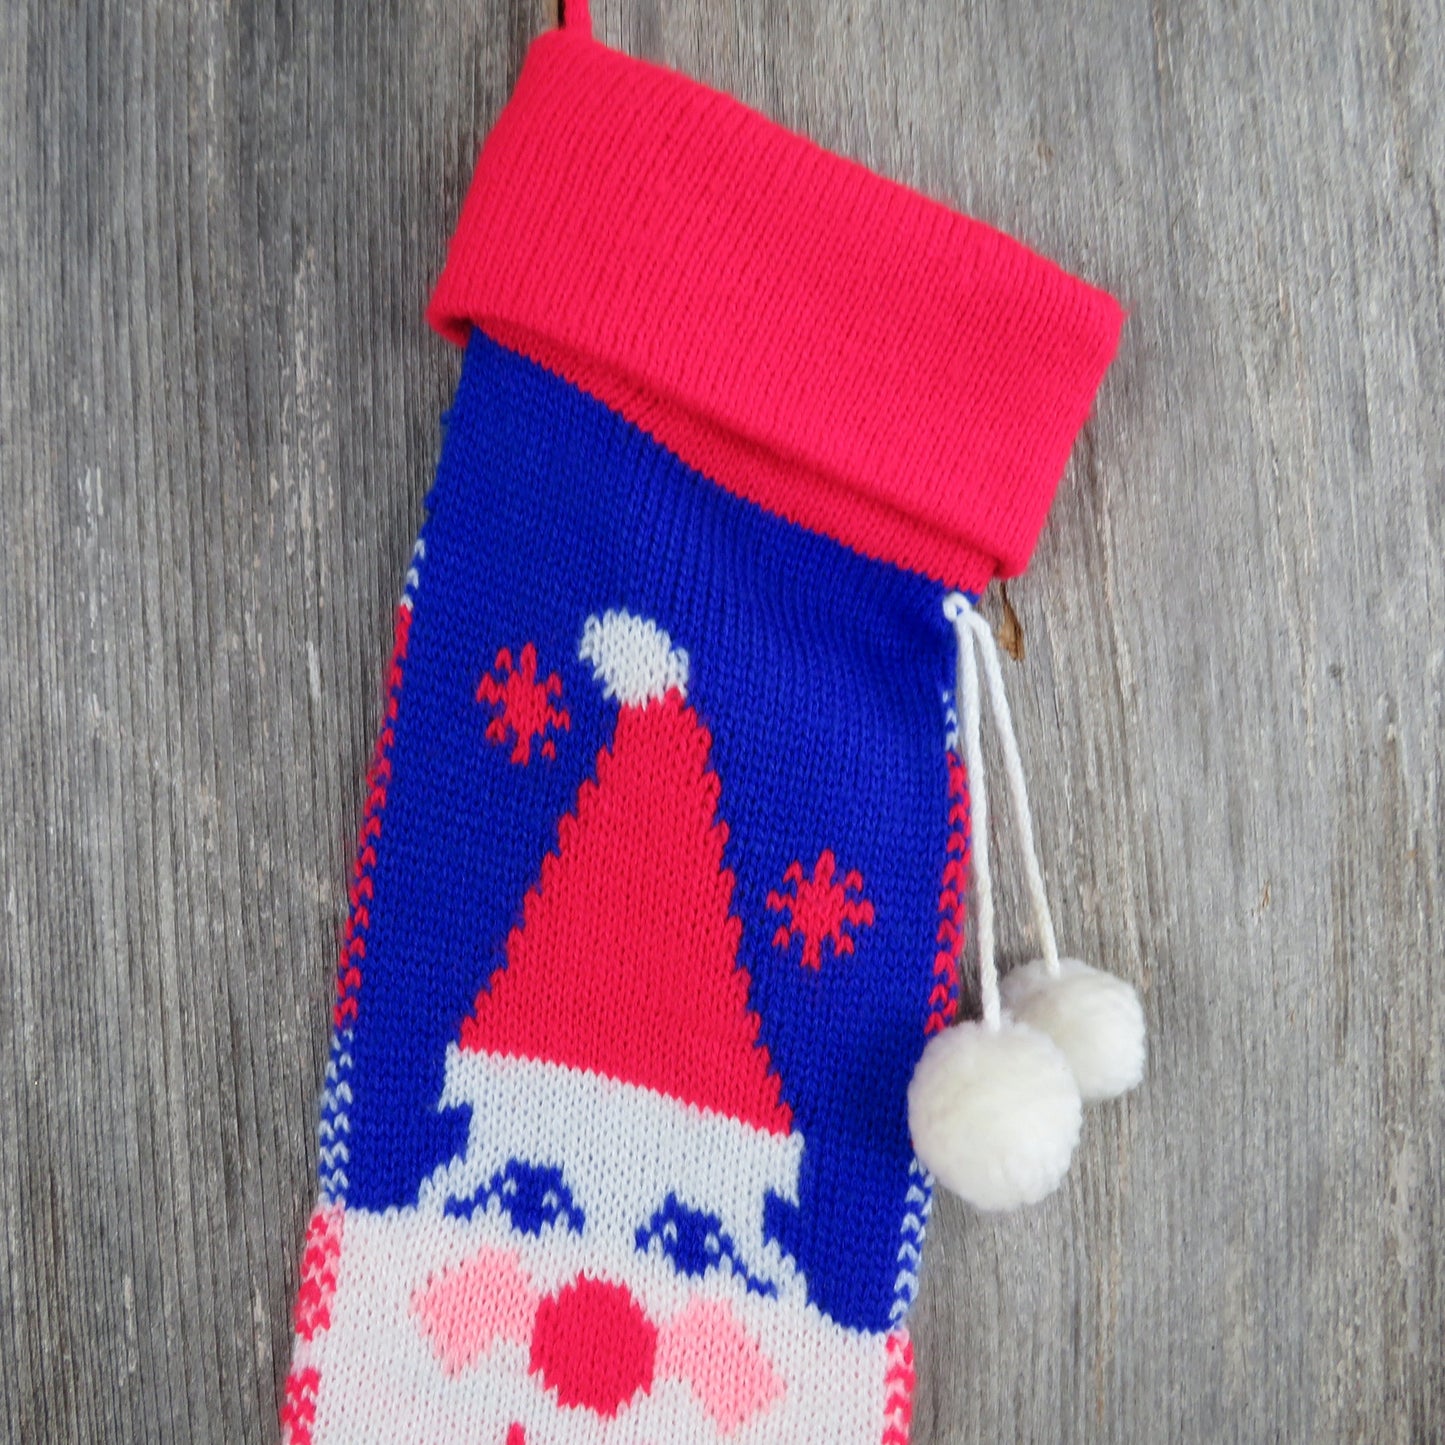 Vintage Santa Claus Knit Stocking Christmas Clown Red Nose Knitted Blue Red White Pom Pom